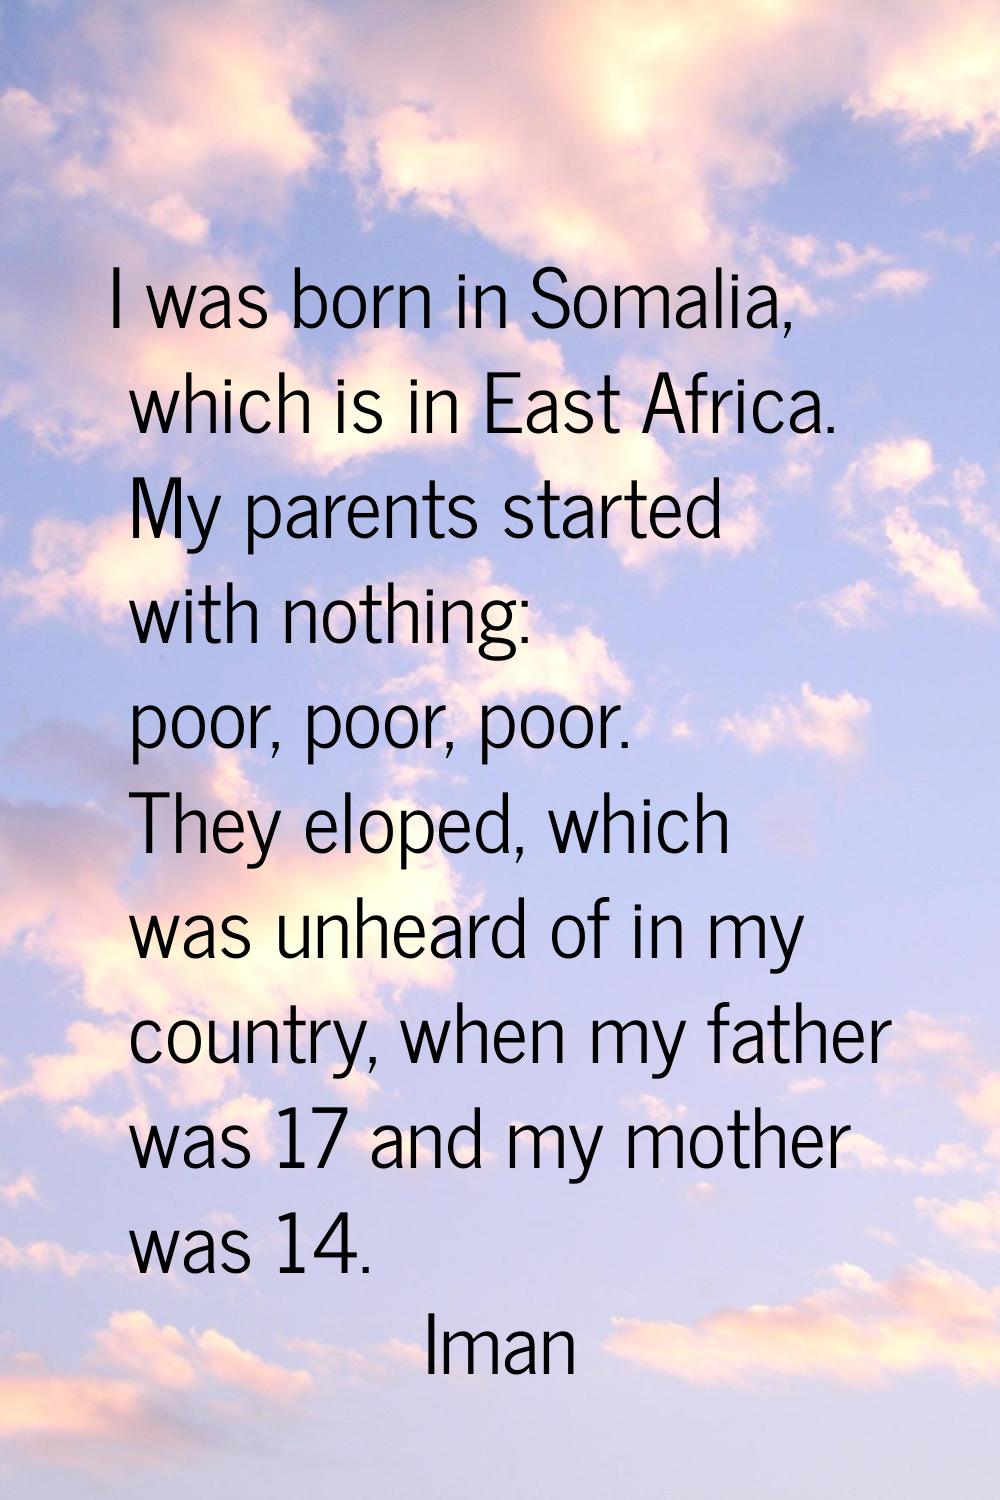 I was born in Somalia, which is in East Africa. My parents started with nothing: poor, poor, poor. 